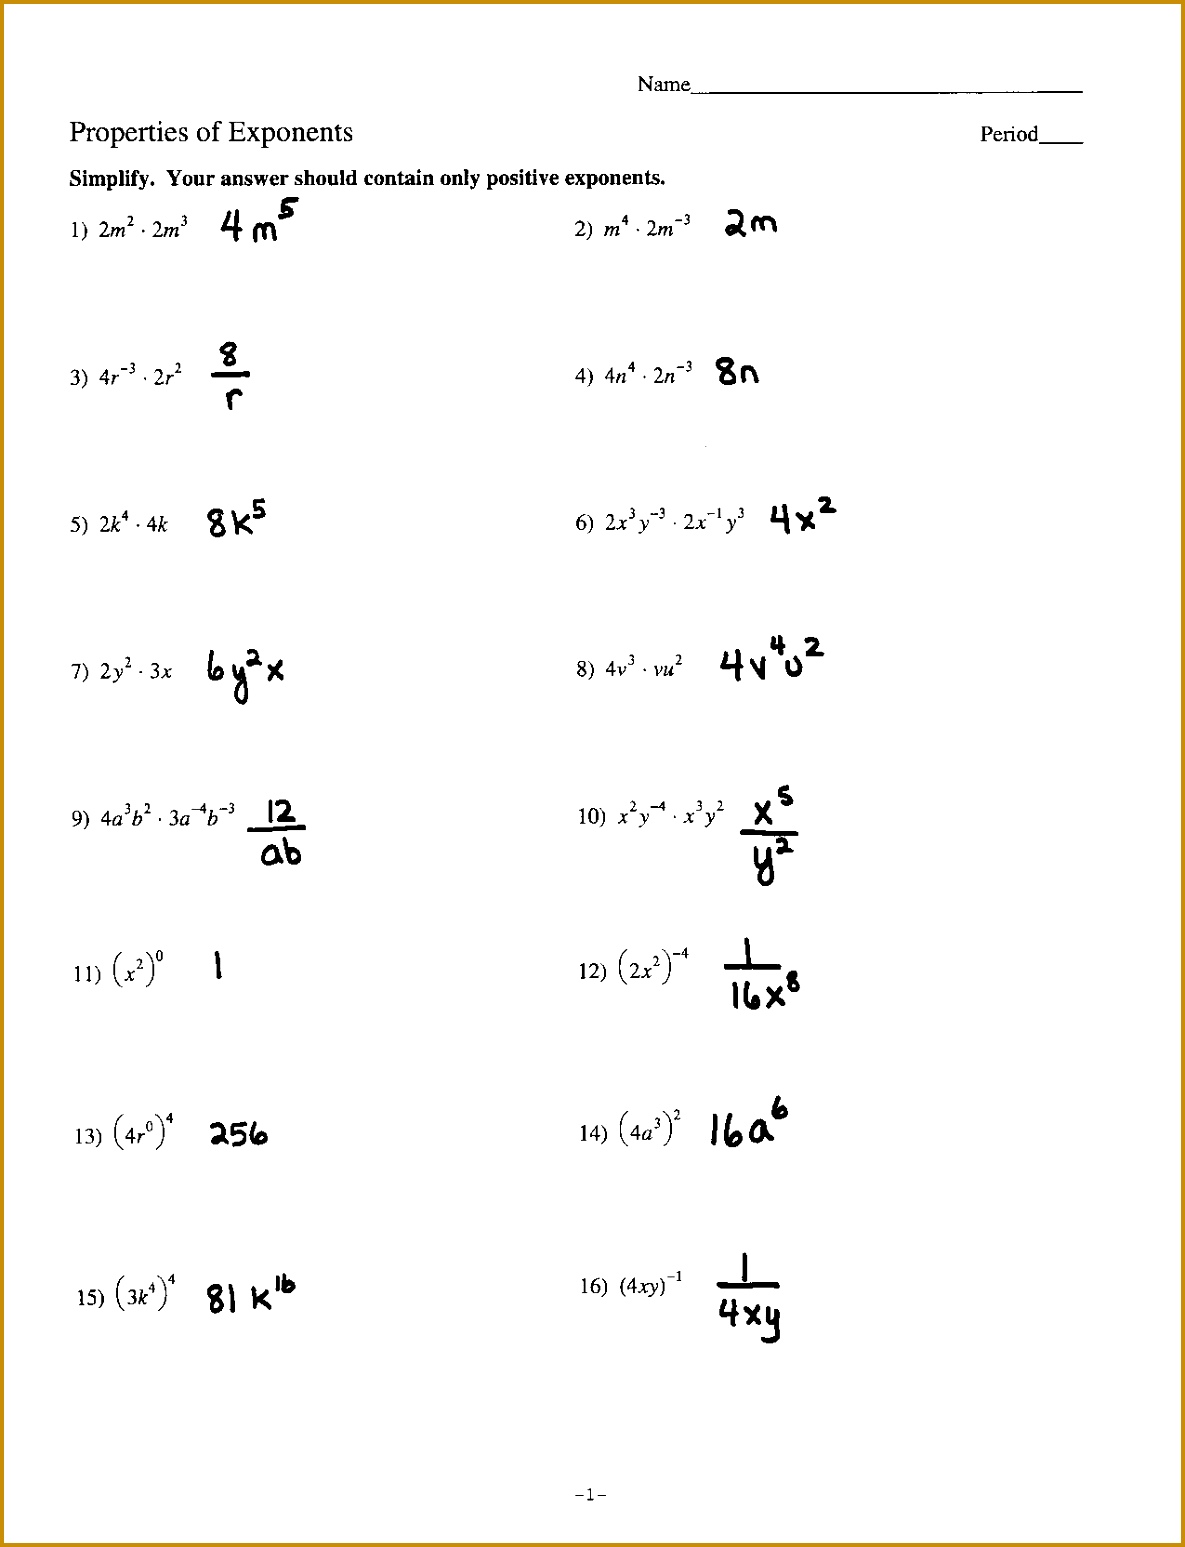 dividing-exponents-with-a-larger-or-equal-exponent-in-the-dividend-all